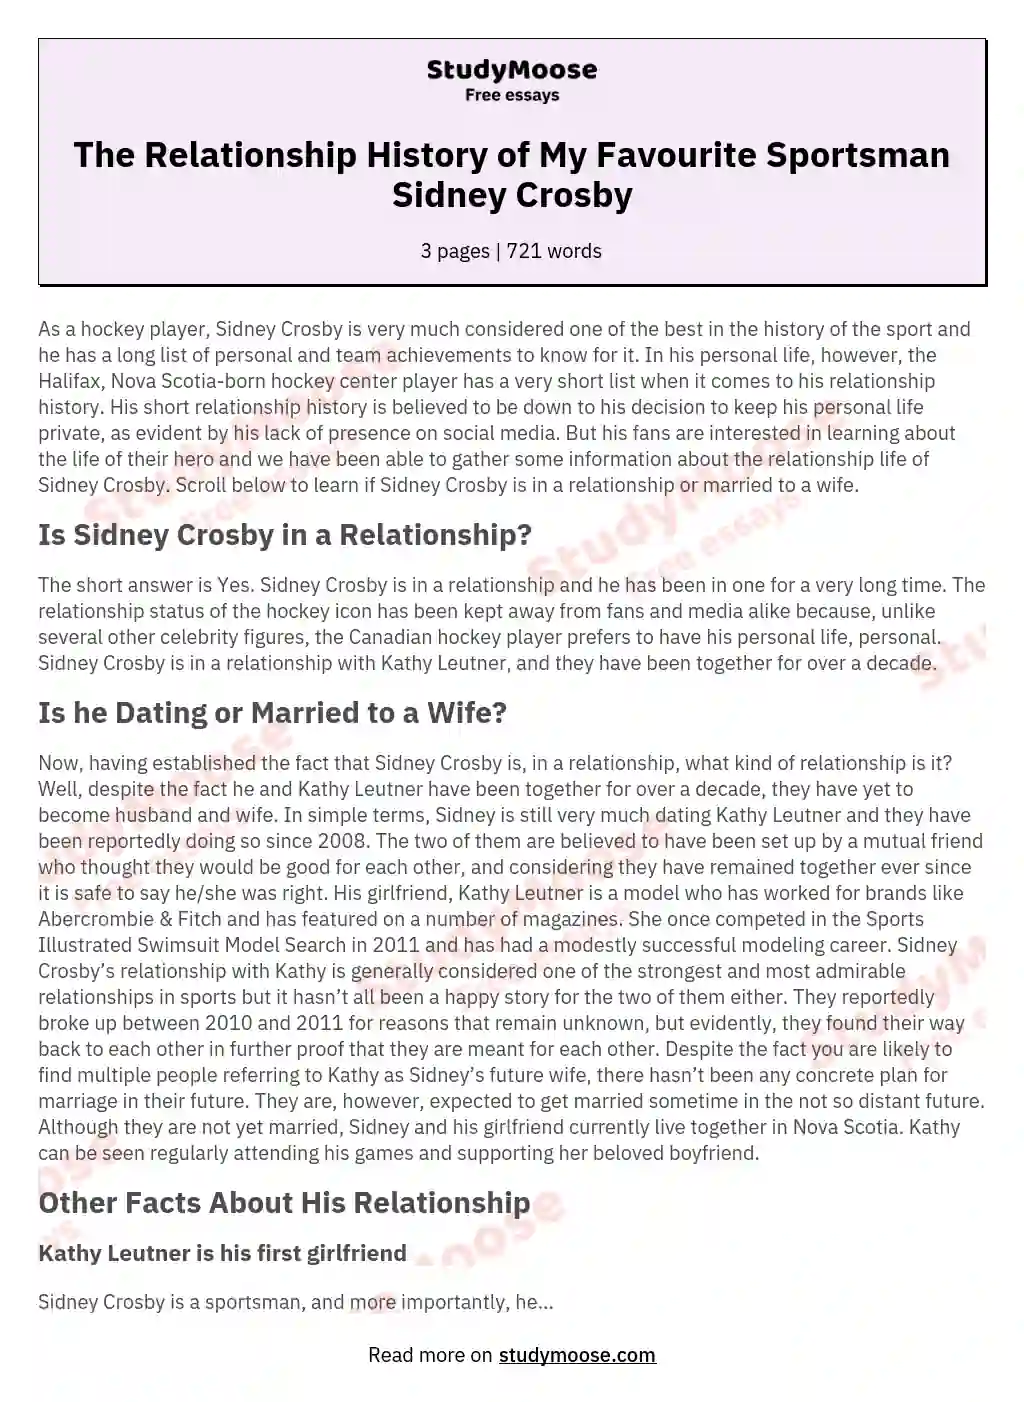 The Relationship History of My Favourite Sportsman Sidney Crosby essay